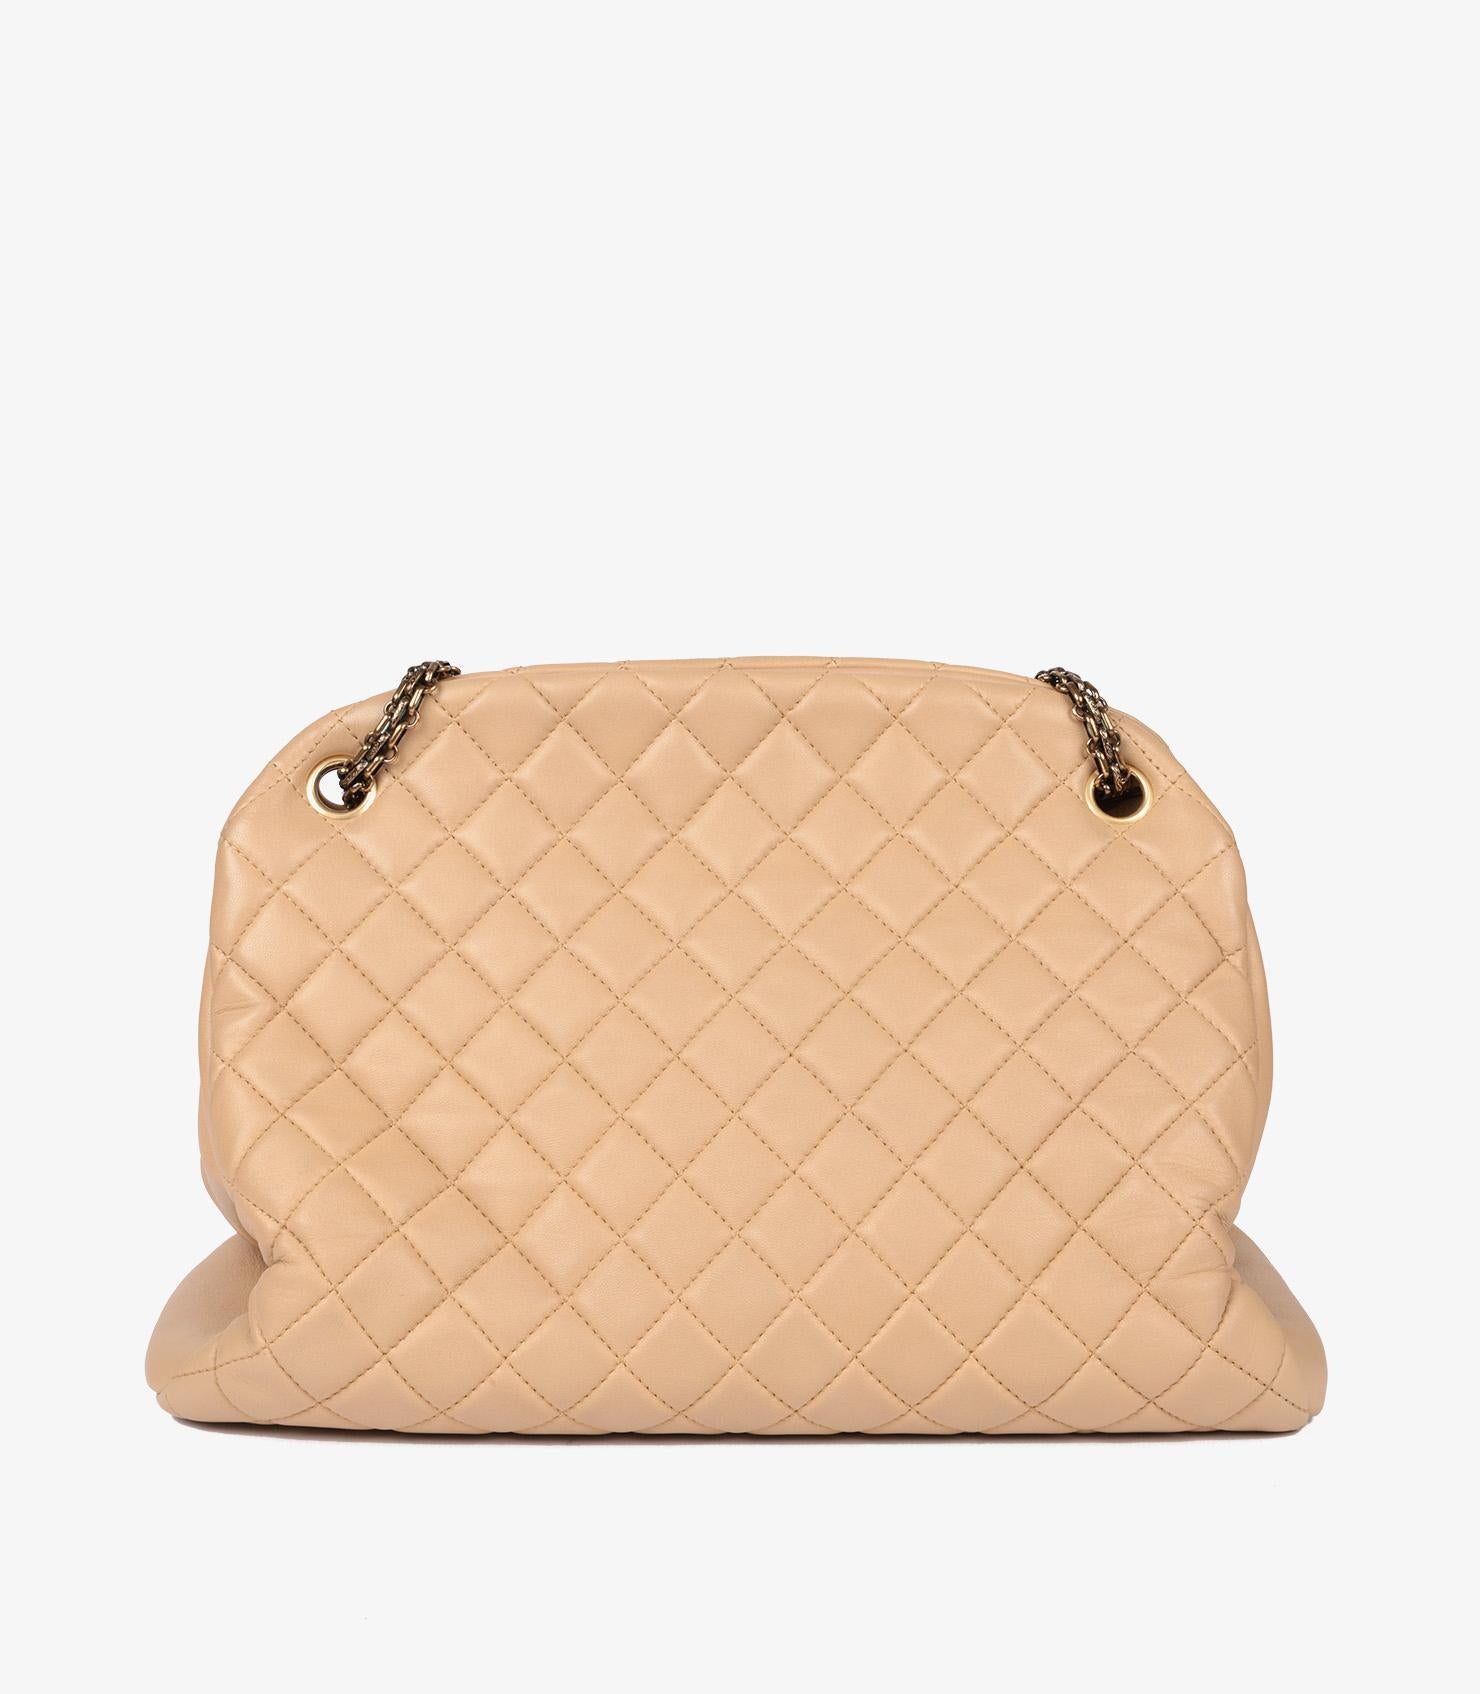 Chanel Beige Quilted Lambskin Large Just Mademoiselle Bowling Bag For Sale 2